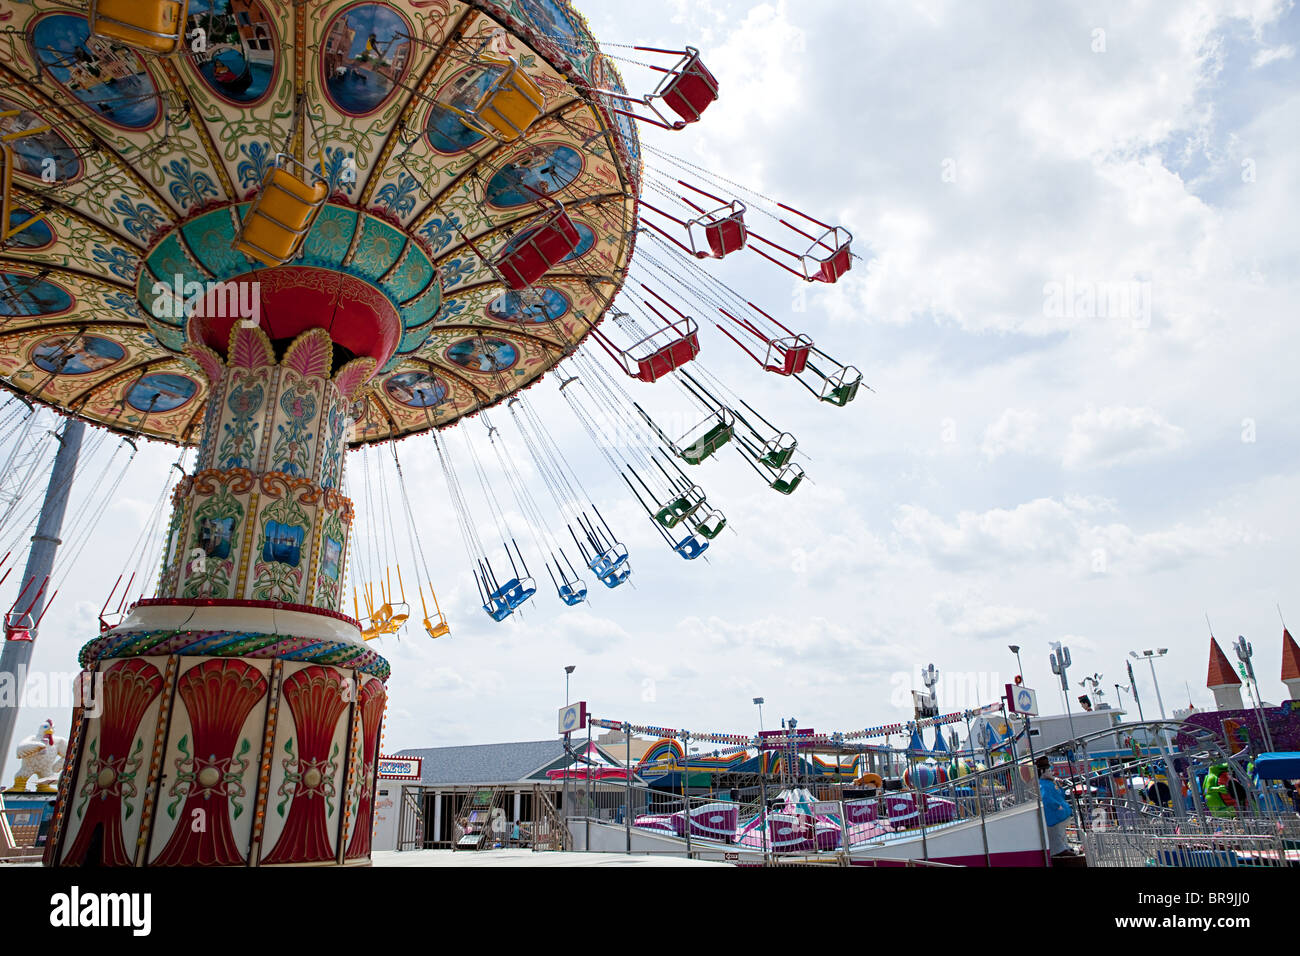 Amusement park ride at seaside heights, new jersey Stock Photo